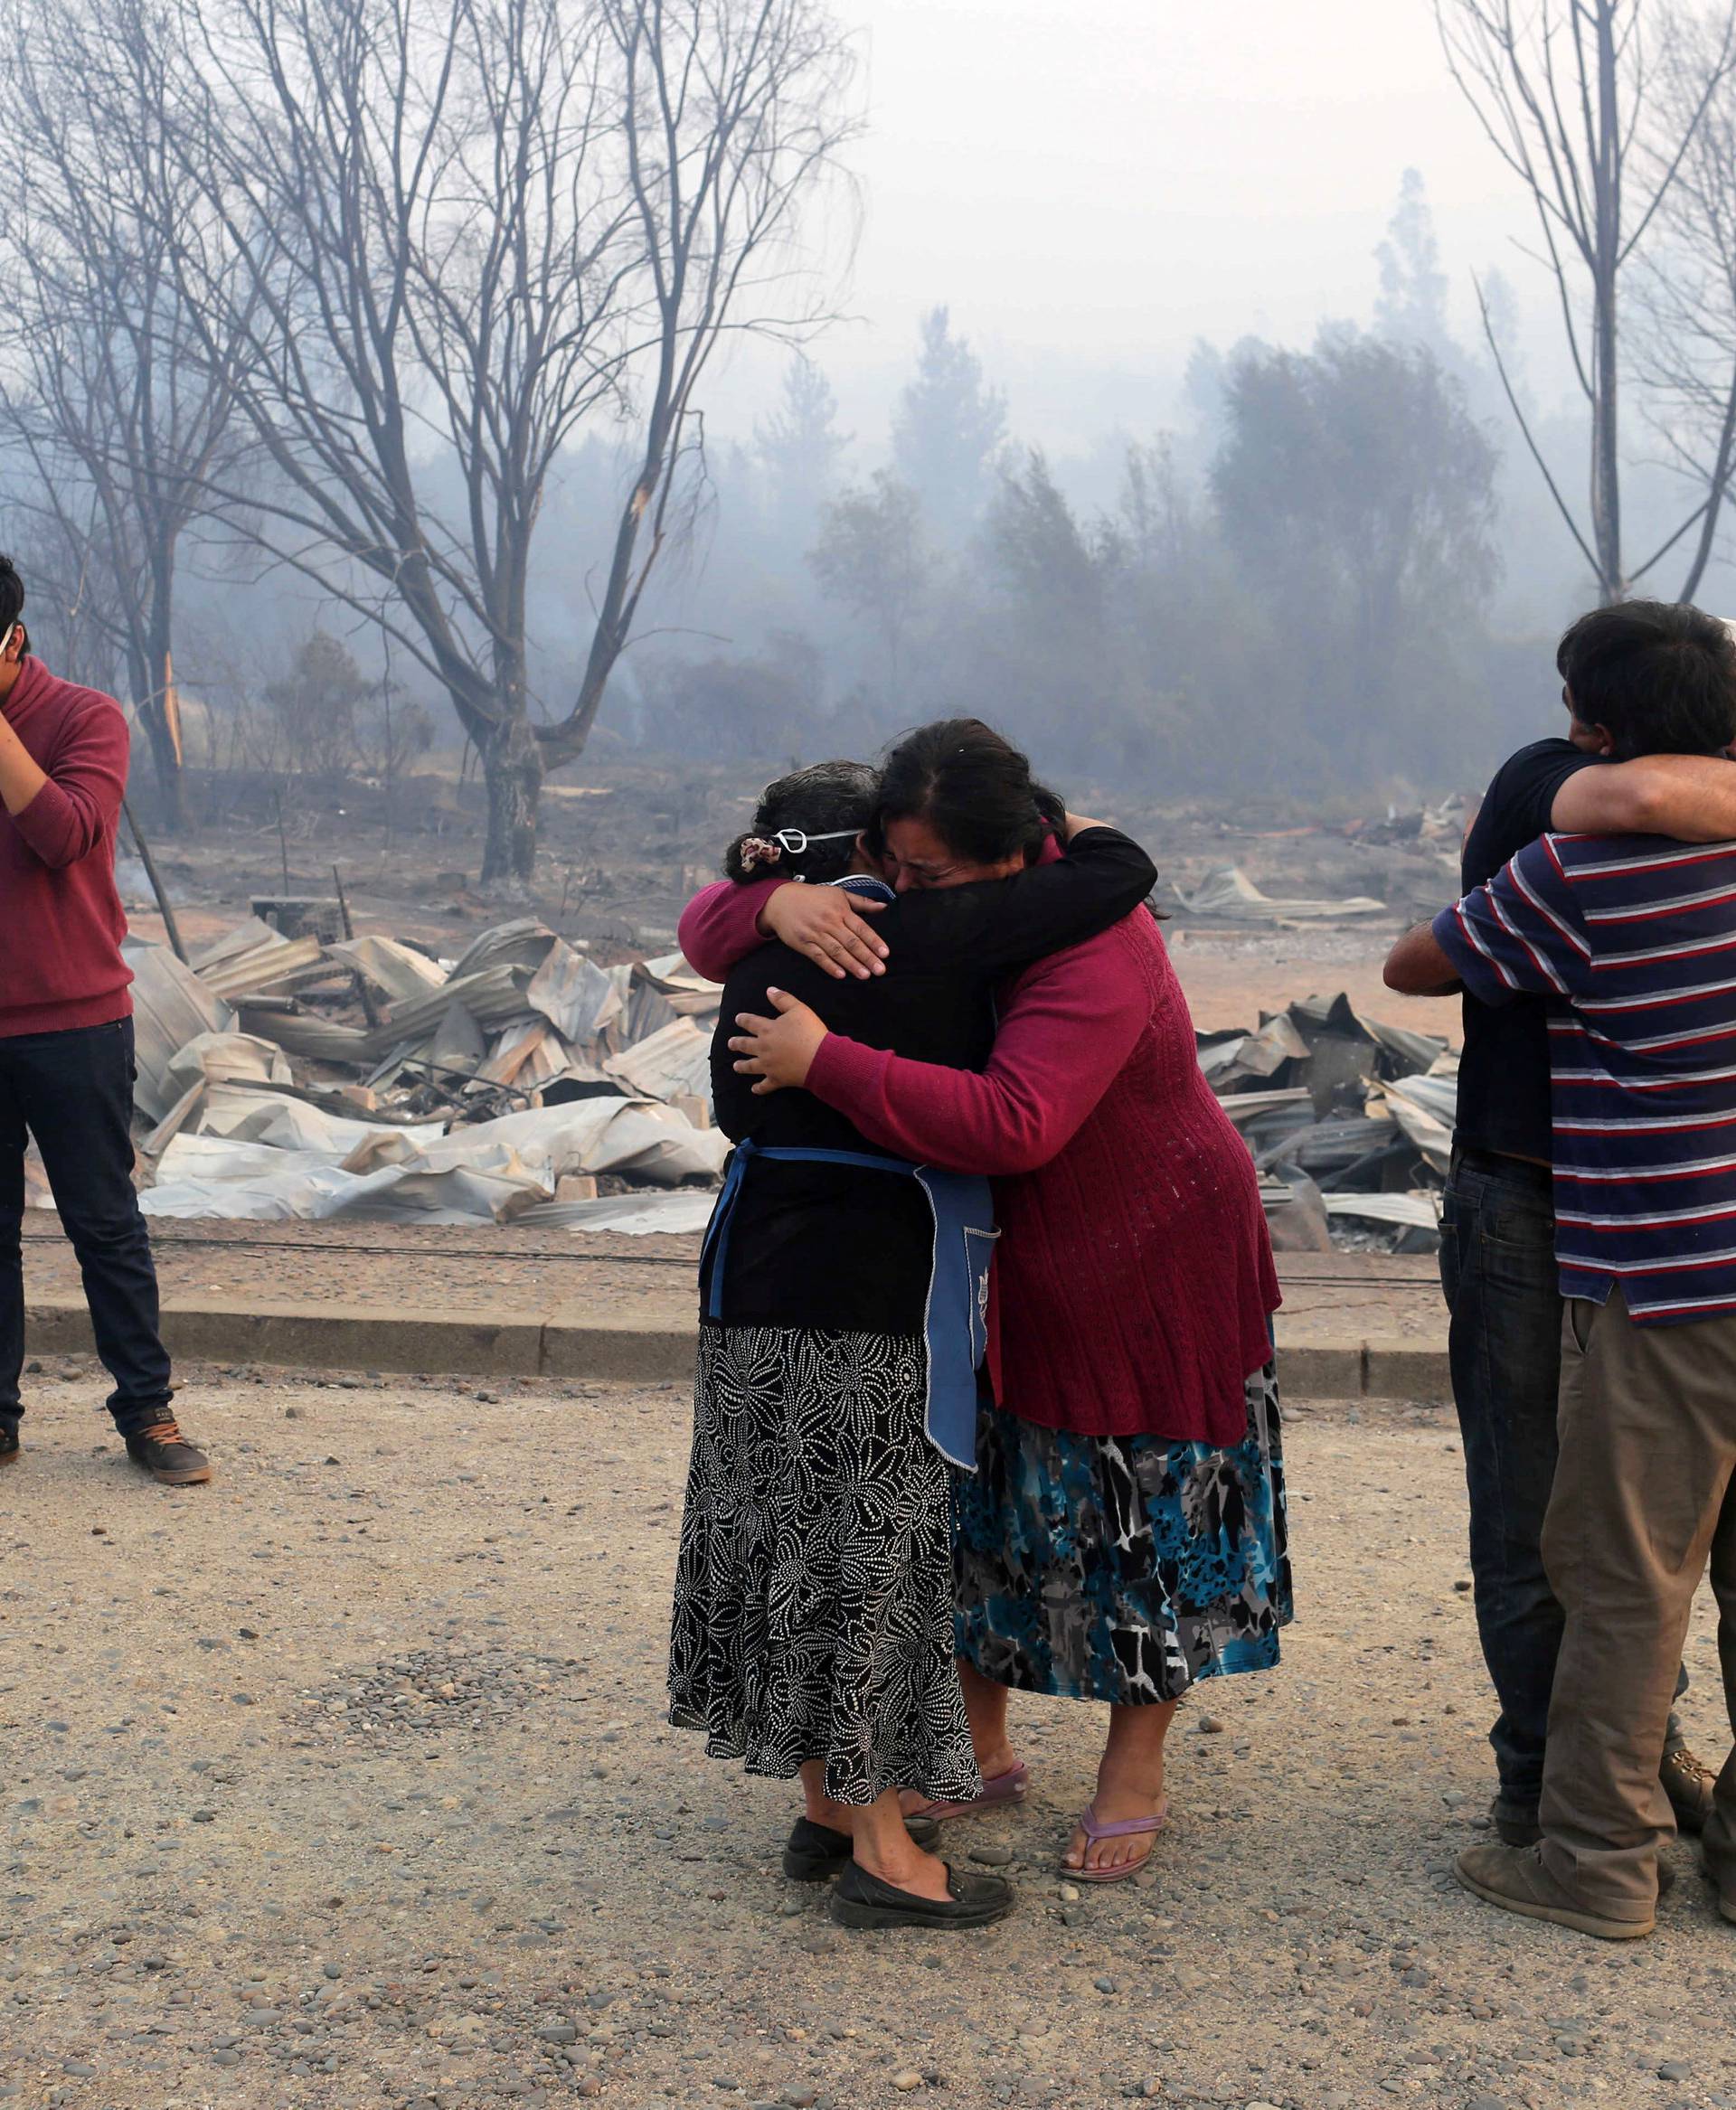 People react while standing next to burnt houses as the worst wildfires in Chile's modern history ravage wide swaths of the country's central-south regions, in Santa Olga